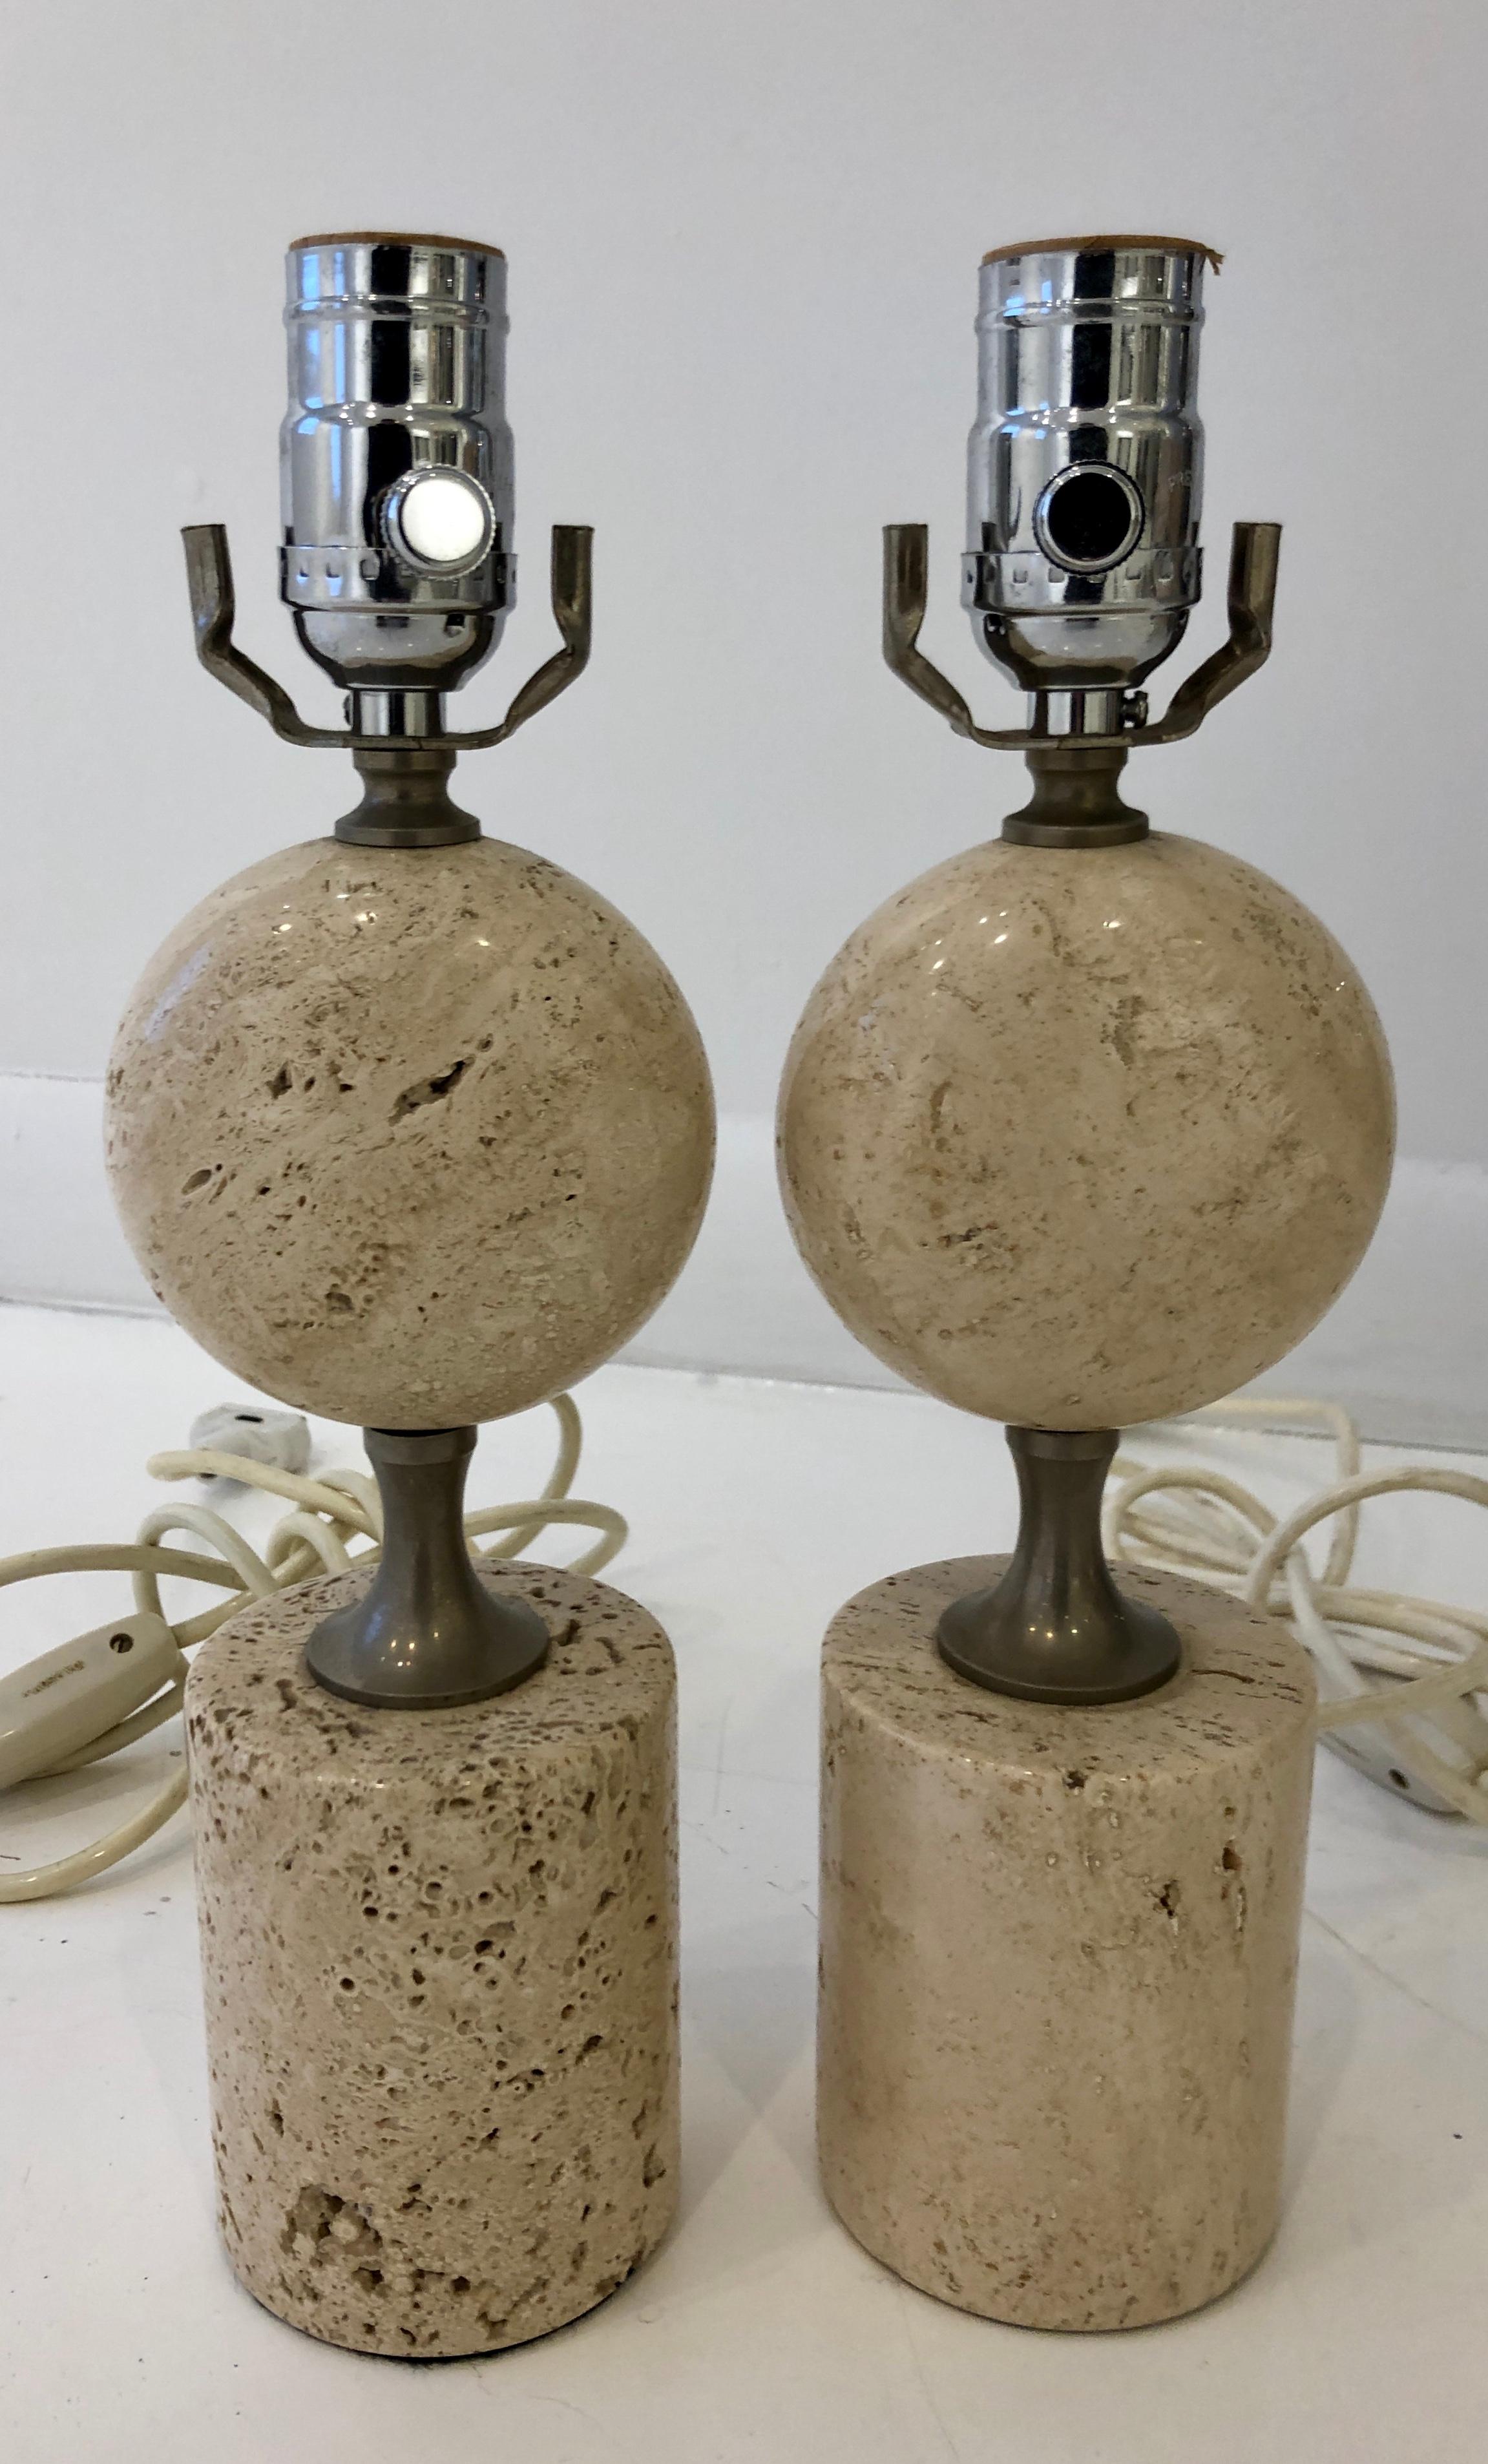 Flattened travertine orb on cylindrical travertine pedestal with solid nickel hardware. Shades not included.

Lamps are 13 in. to top of socket, 10 in. to top of marble.